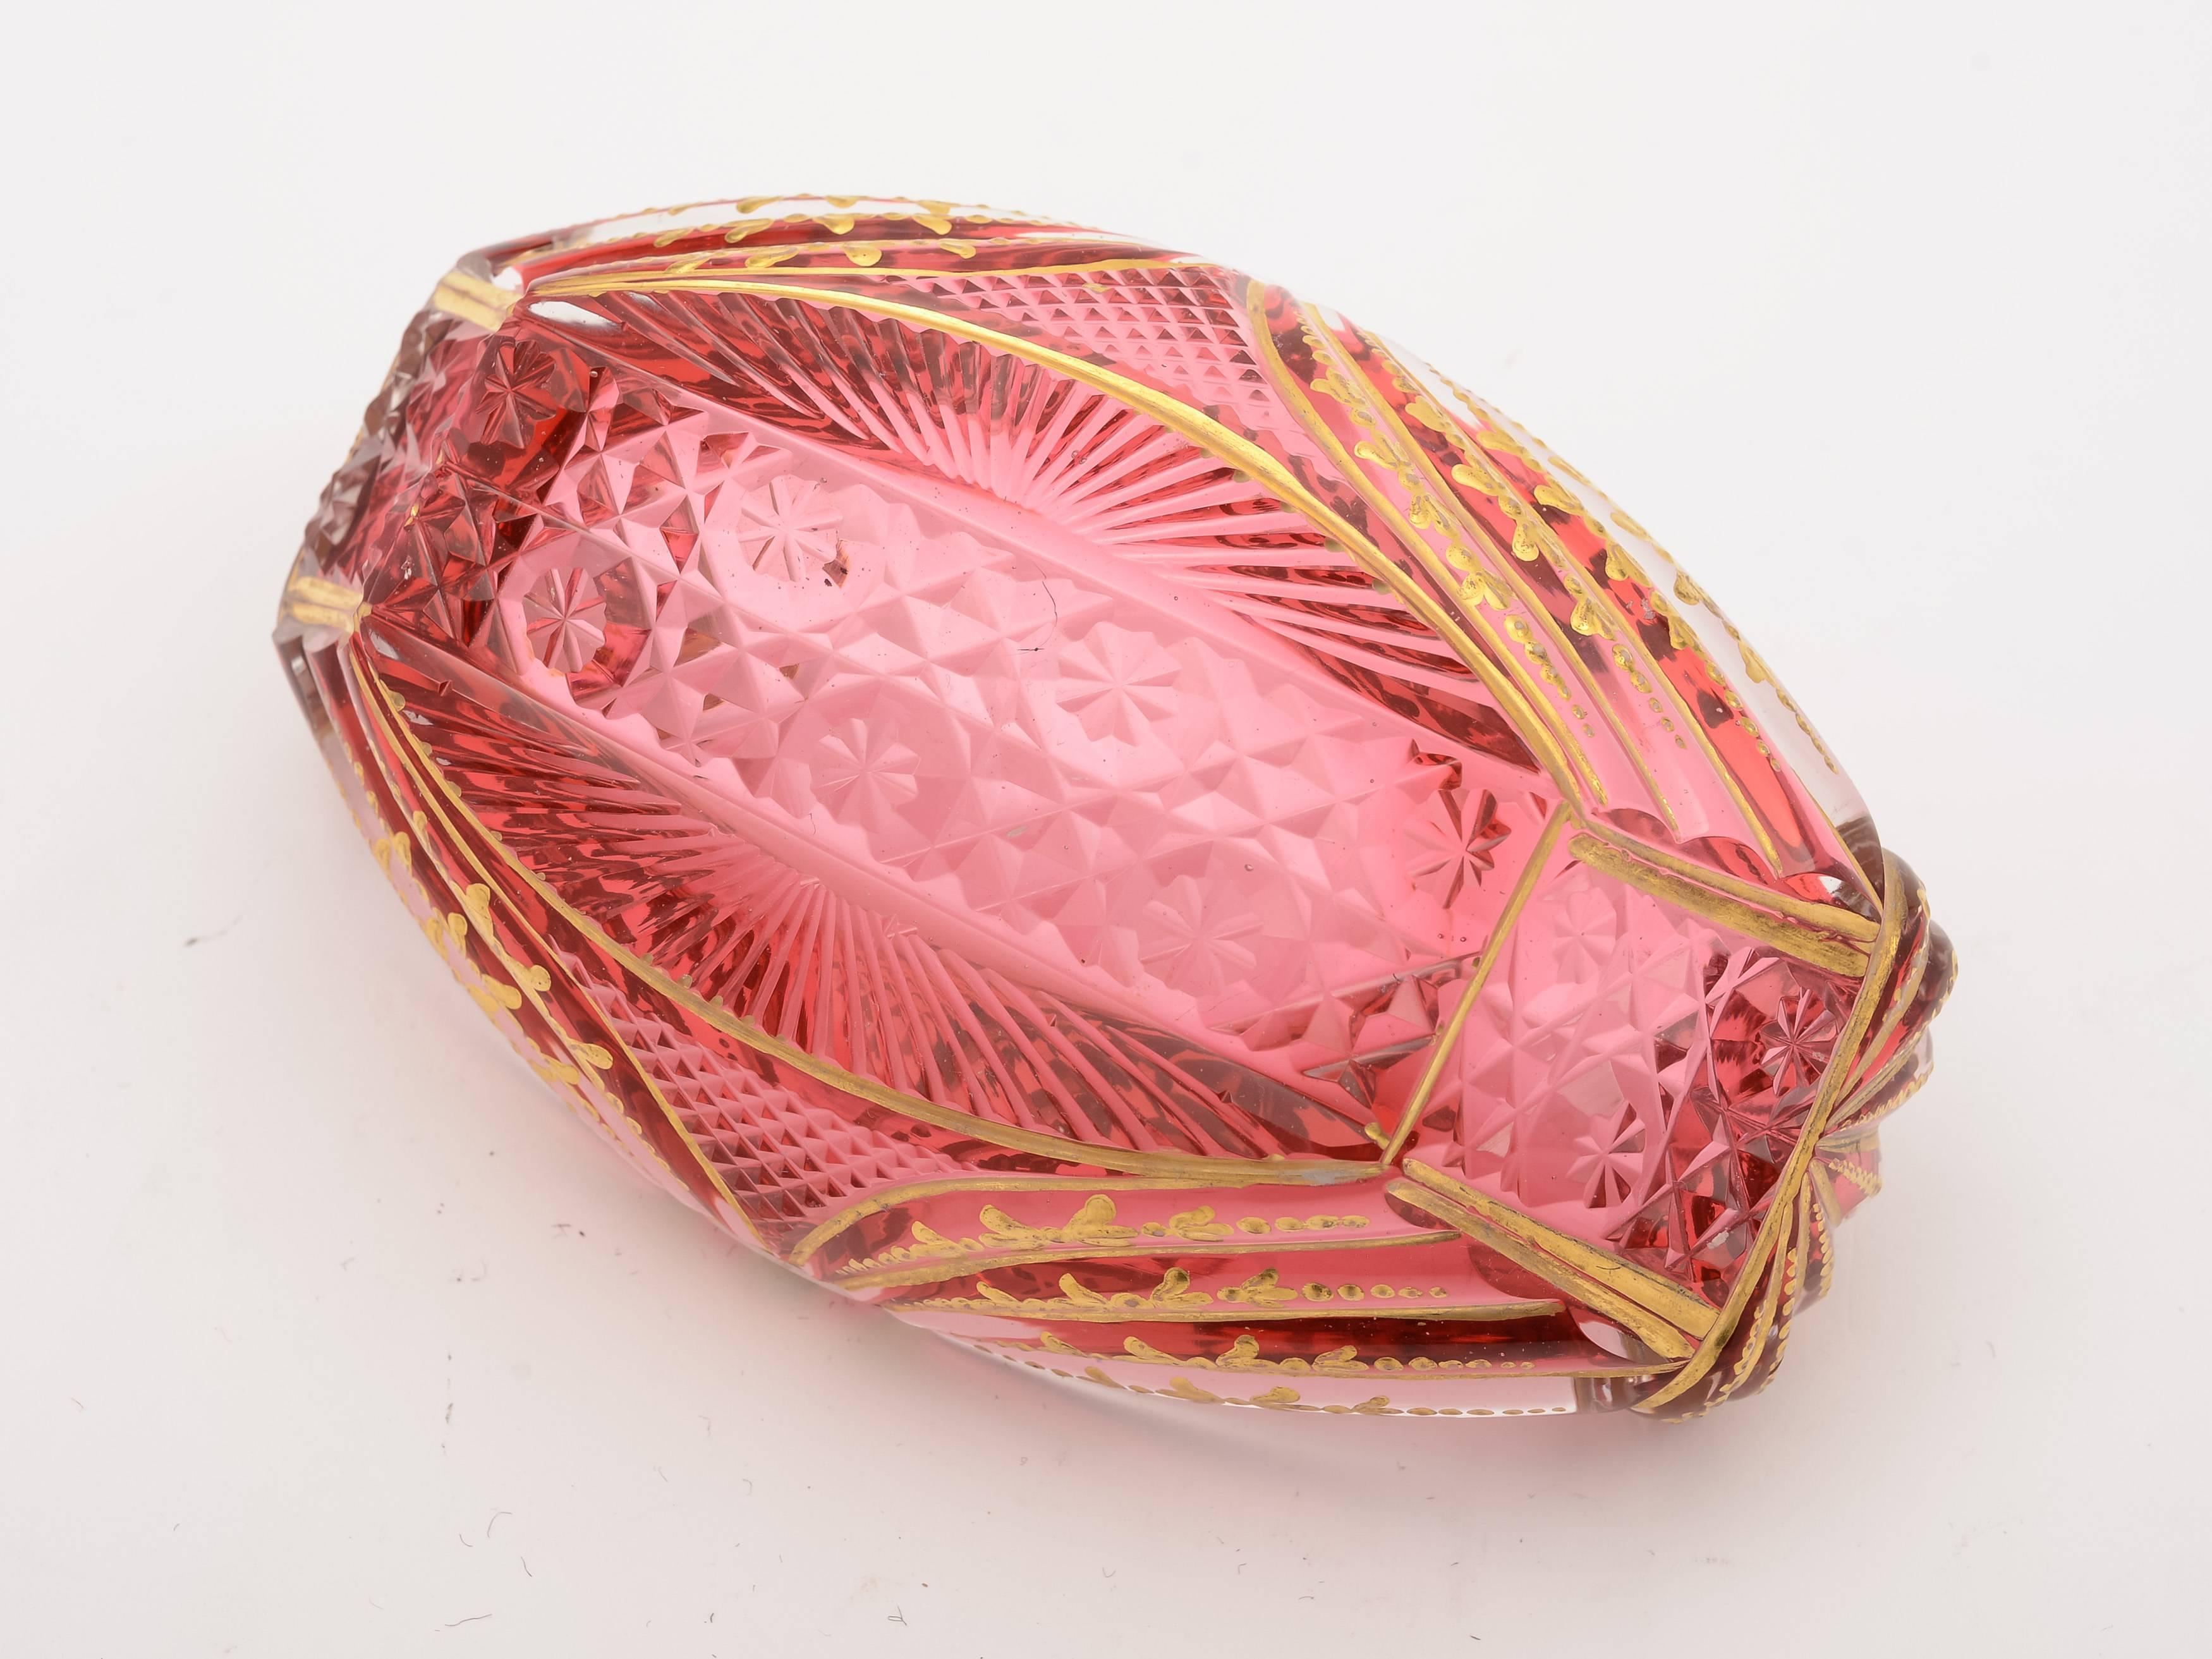 A fabulous English Regency cranberry glass, boat shaped bon bon dish with cut-glass and gold gilt decoration, circa 1830.

  

Measurements:
Height 2 3/4